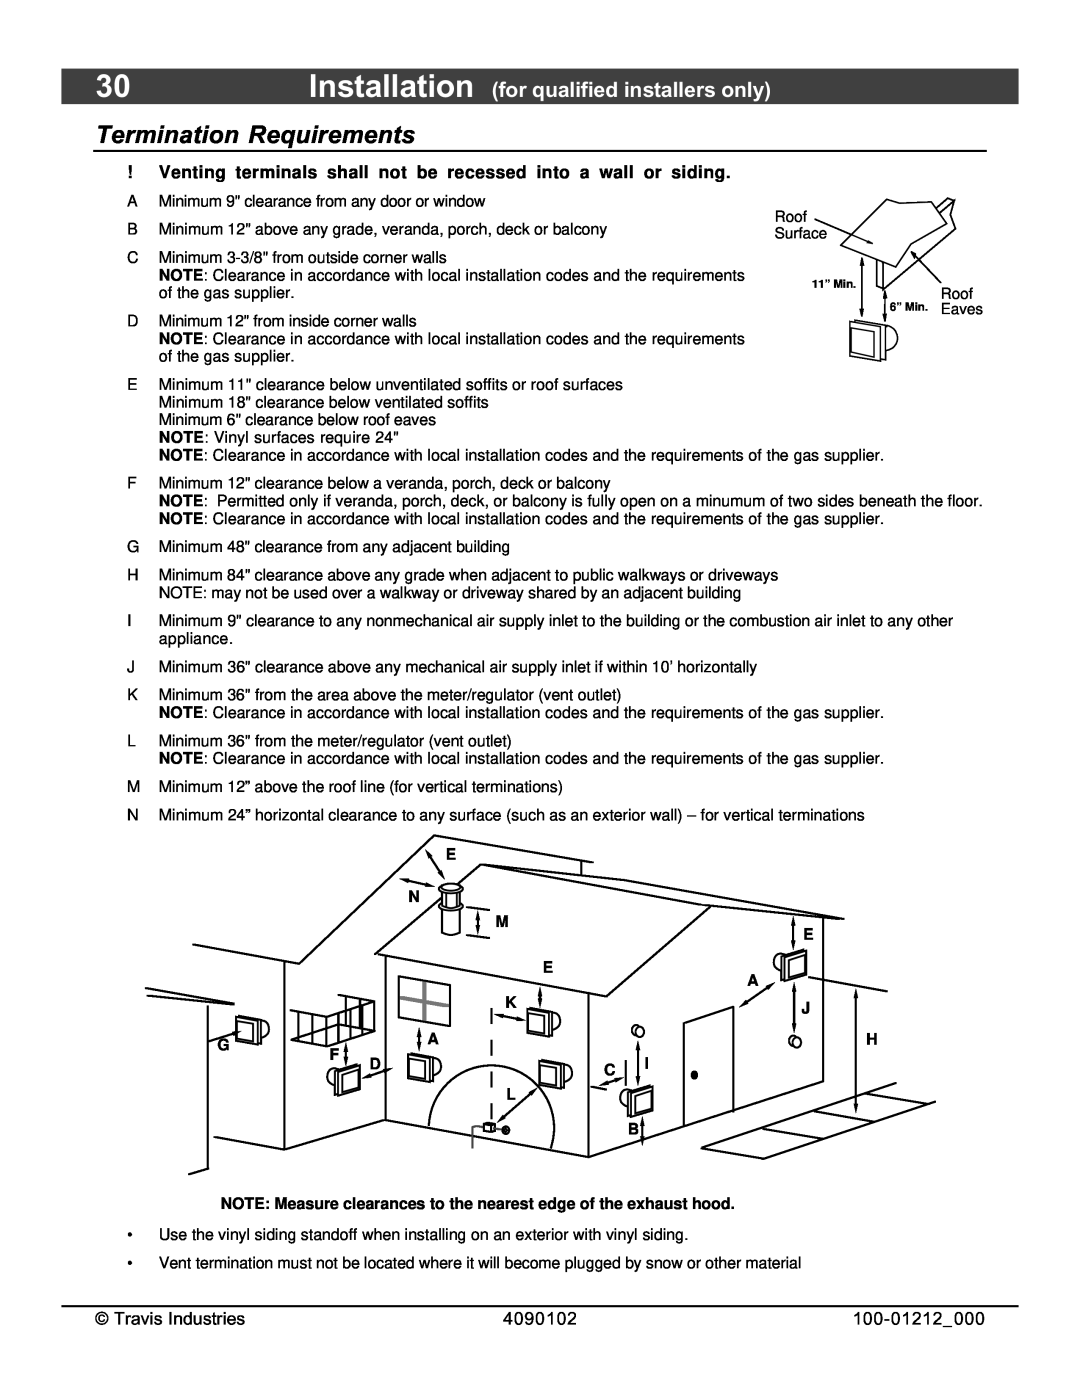 FireplaceXtrordinair 36CF installation manual Termination Requirements, Installation for qualified installers only 